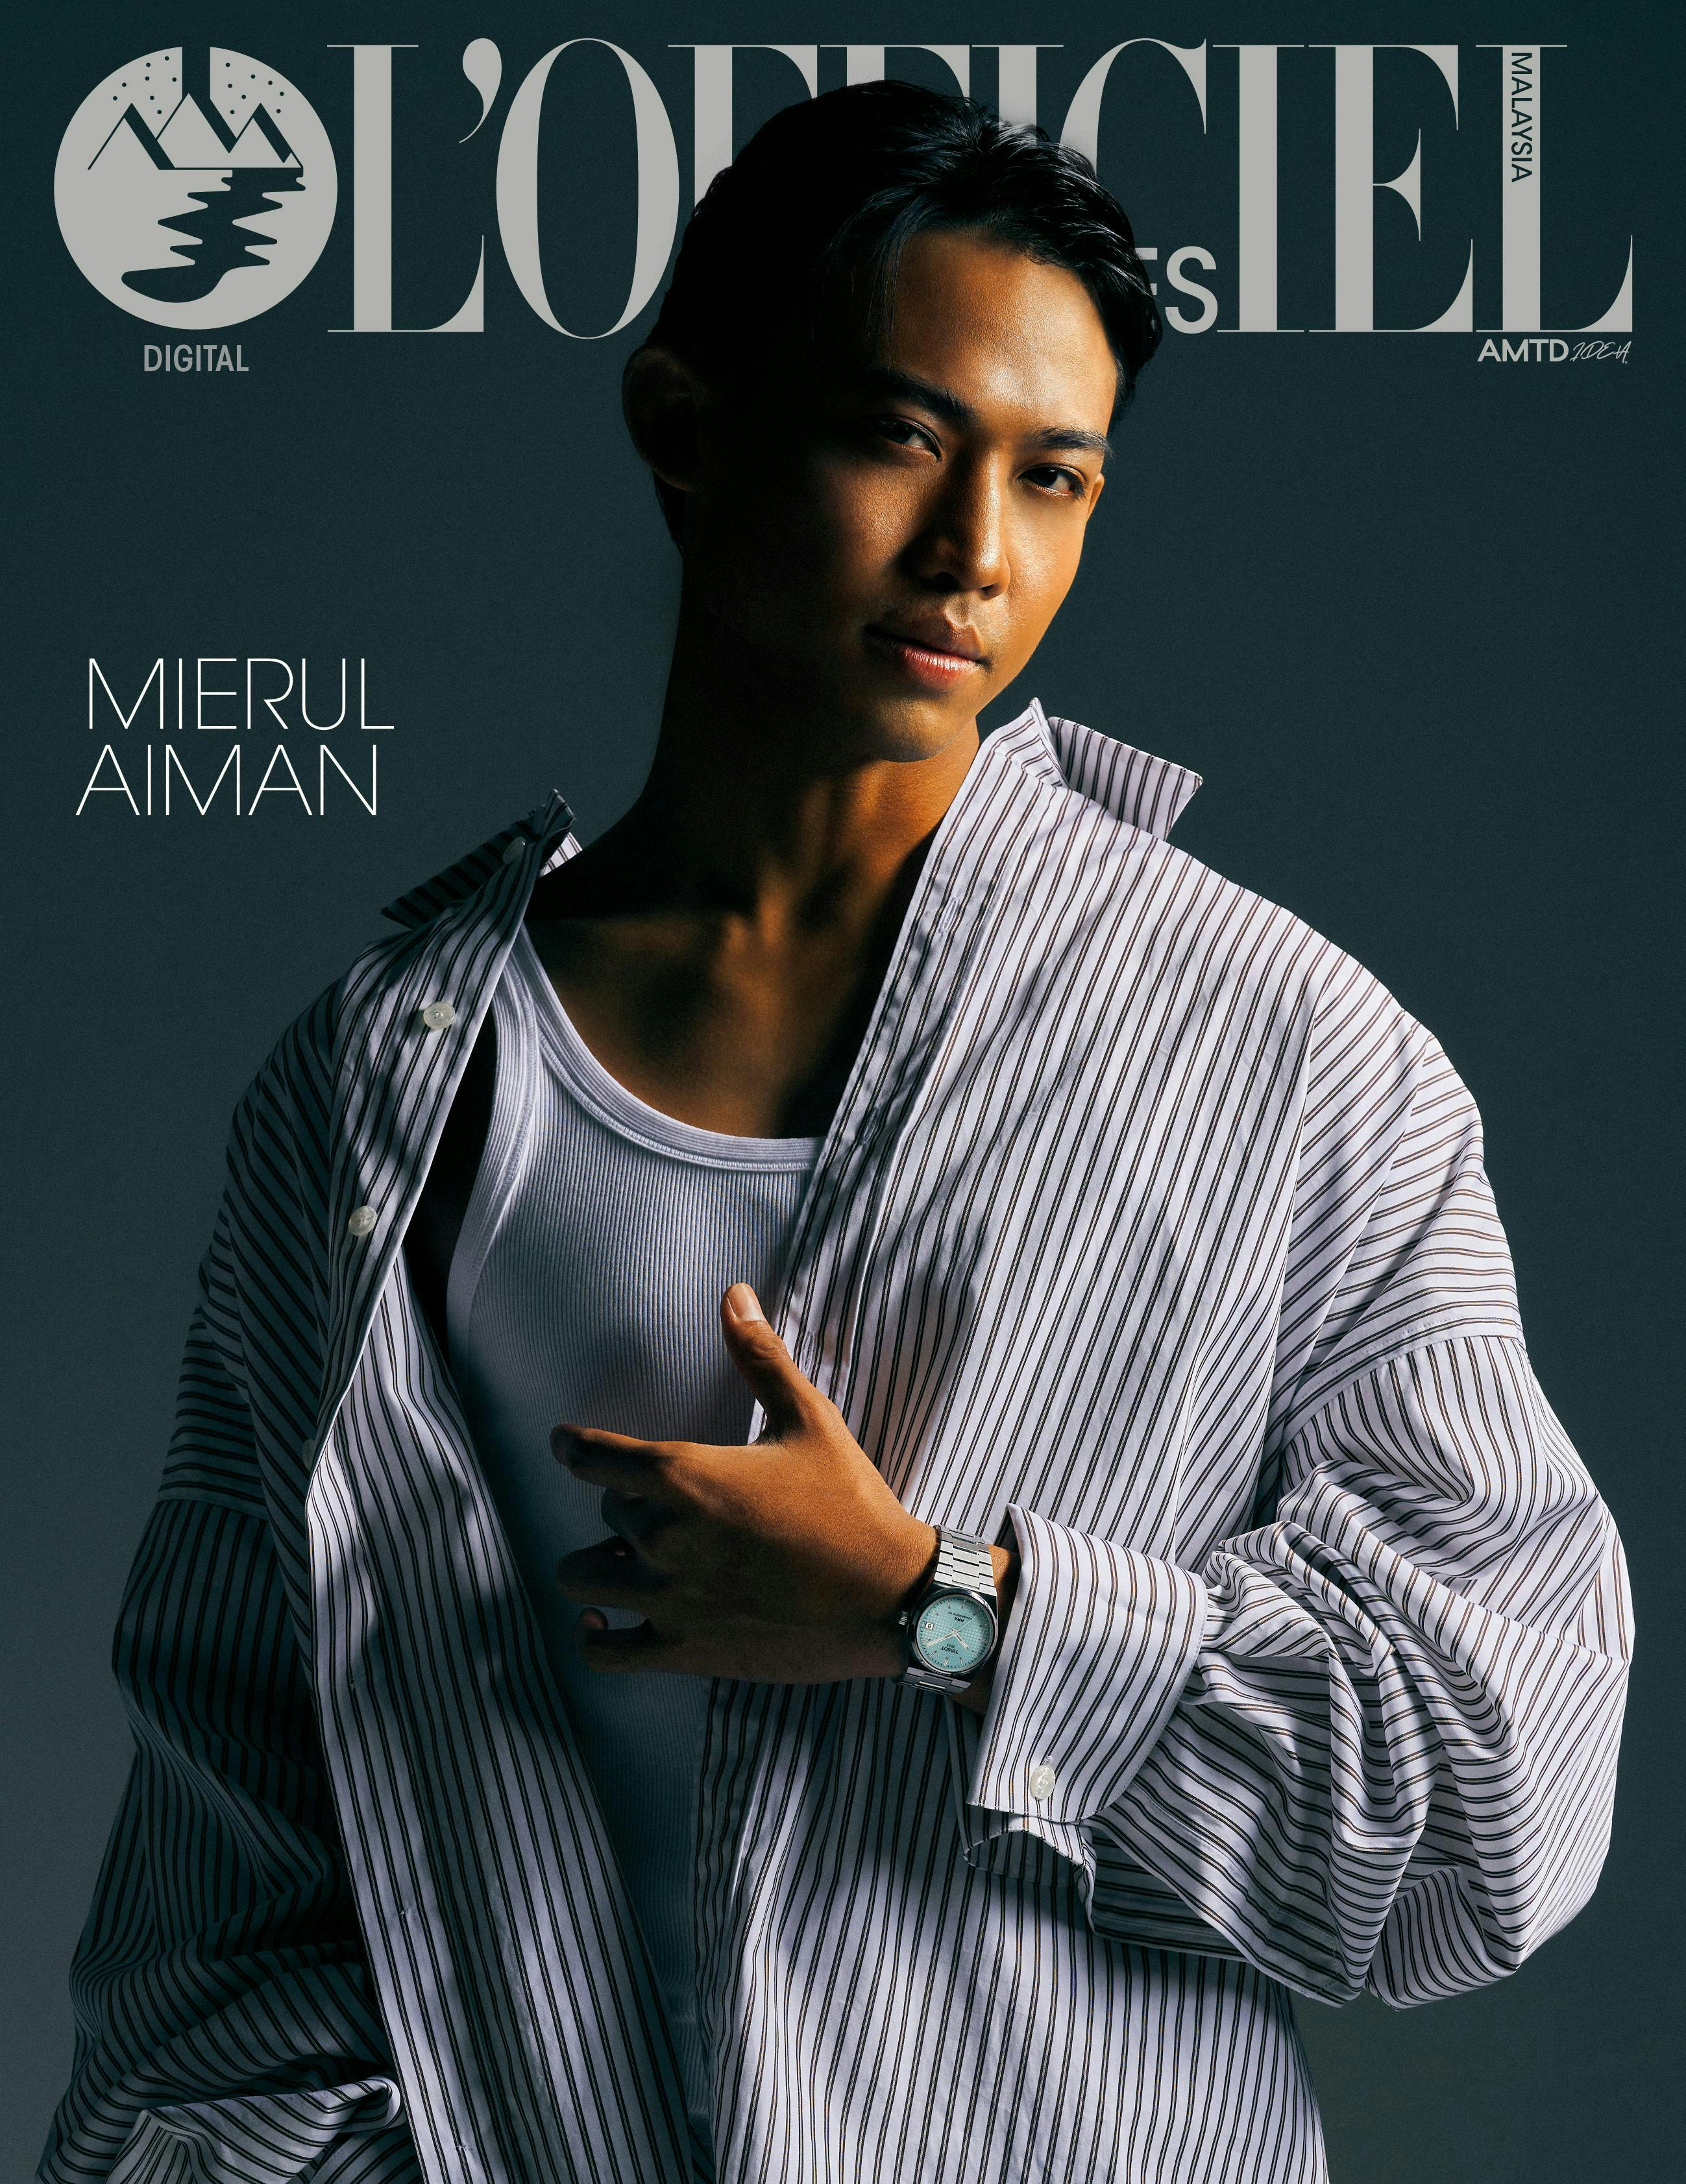 Digital Cover: Rising star Mierul Aiman and the power of dreams